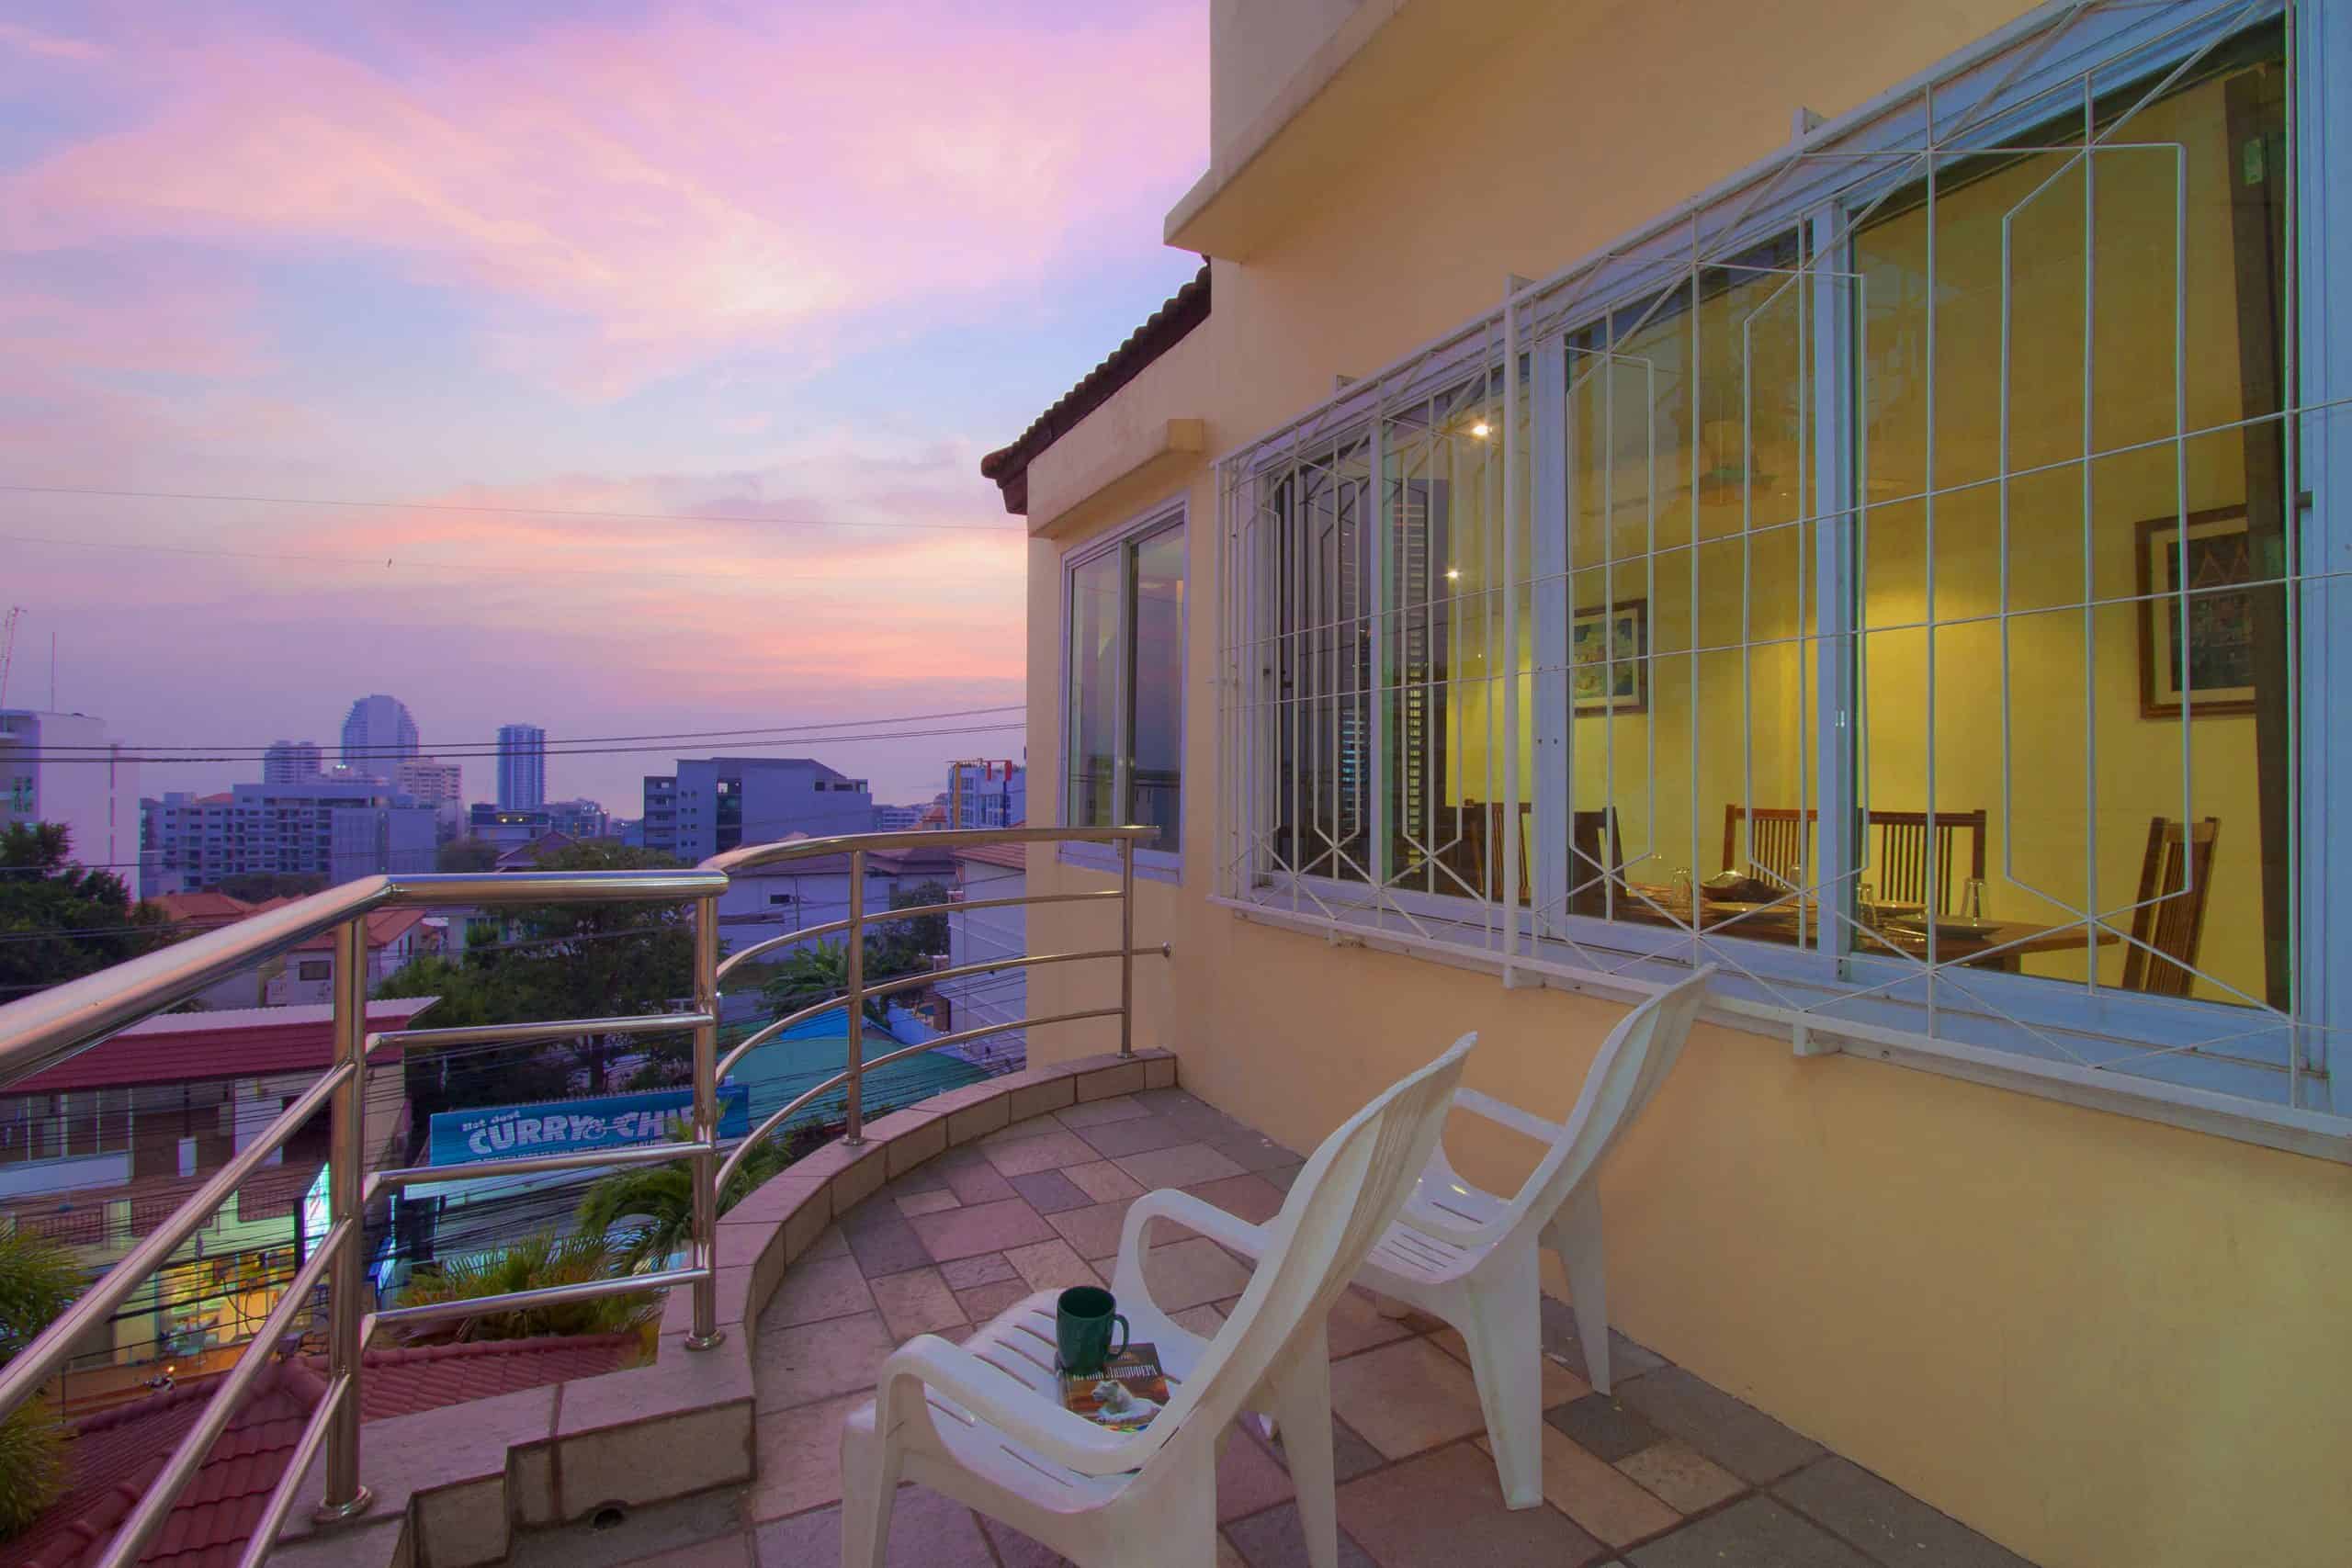 Relax in comfort with all the amenities of home in our stylish studio apartment in Pattaya, featuring a cozy bed, functional kitchenette, private shower, air conditioning, and Wi-Fi